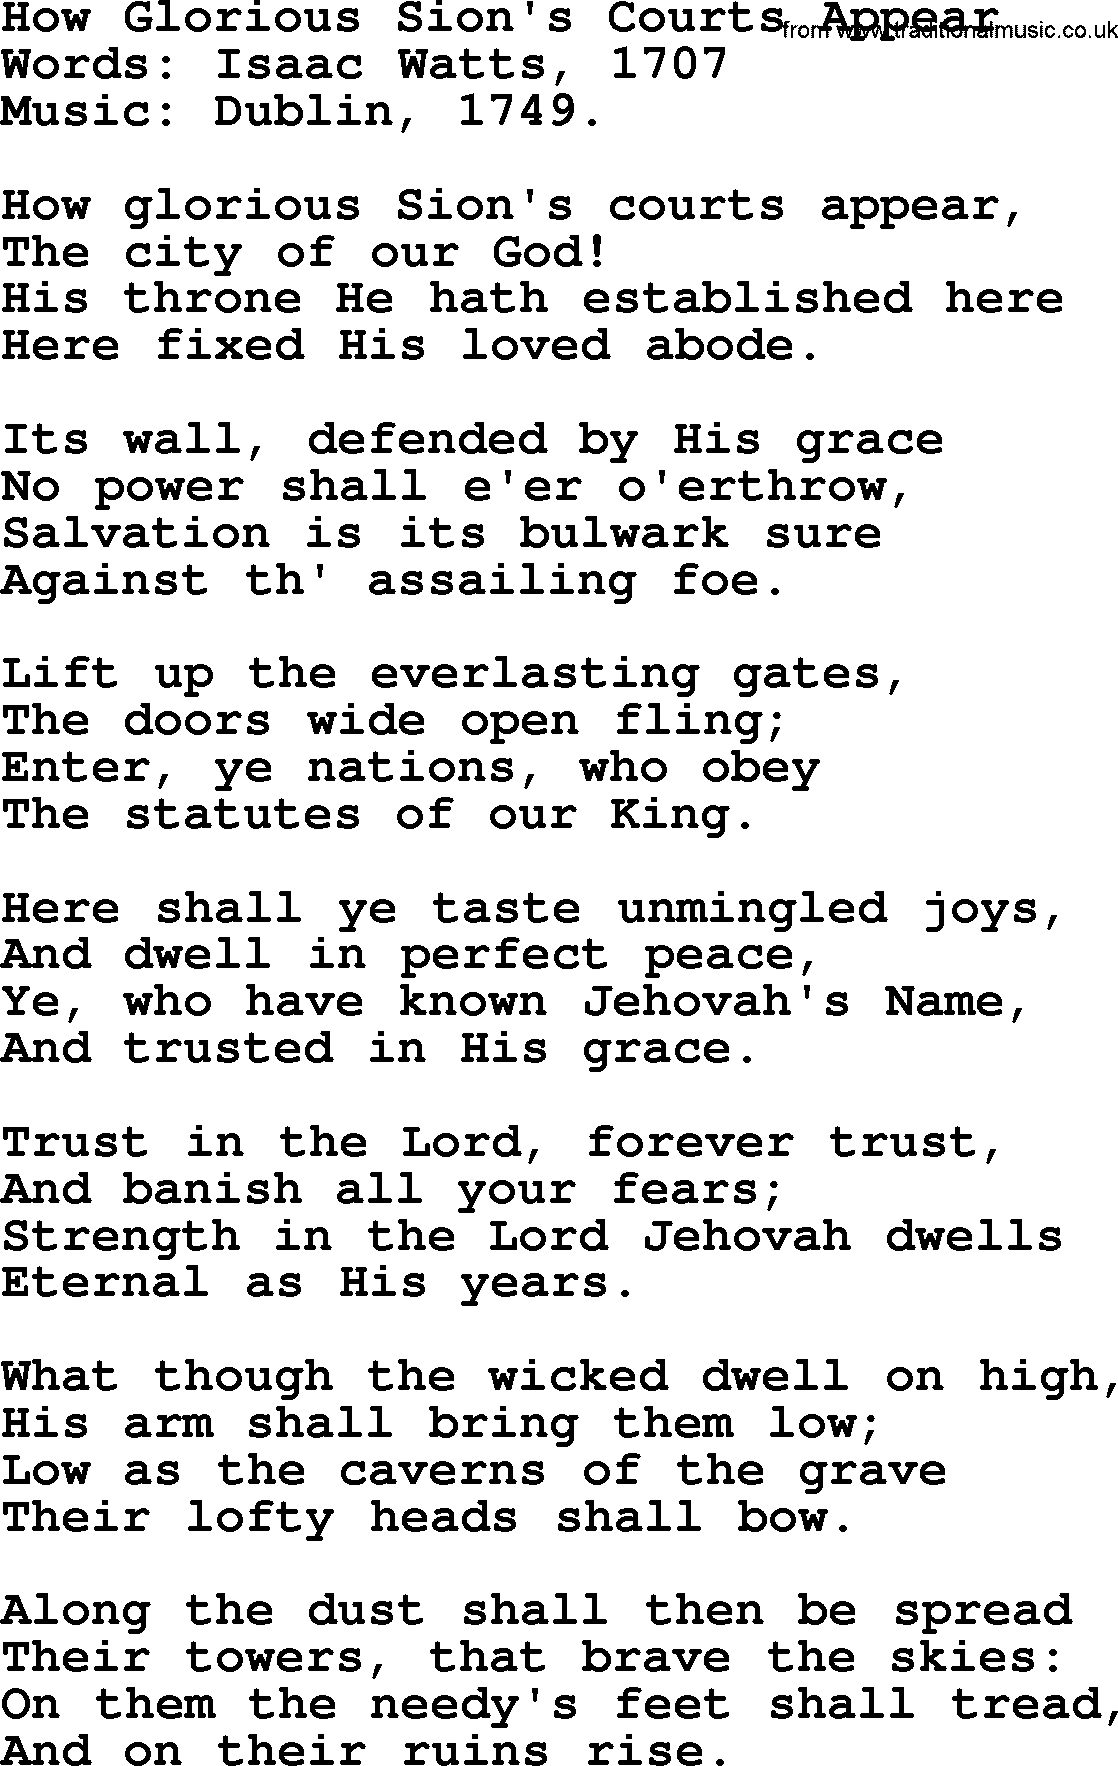 Isaac Watts Christian hymn: How Glorious Sion's Courts Appear- lyricss